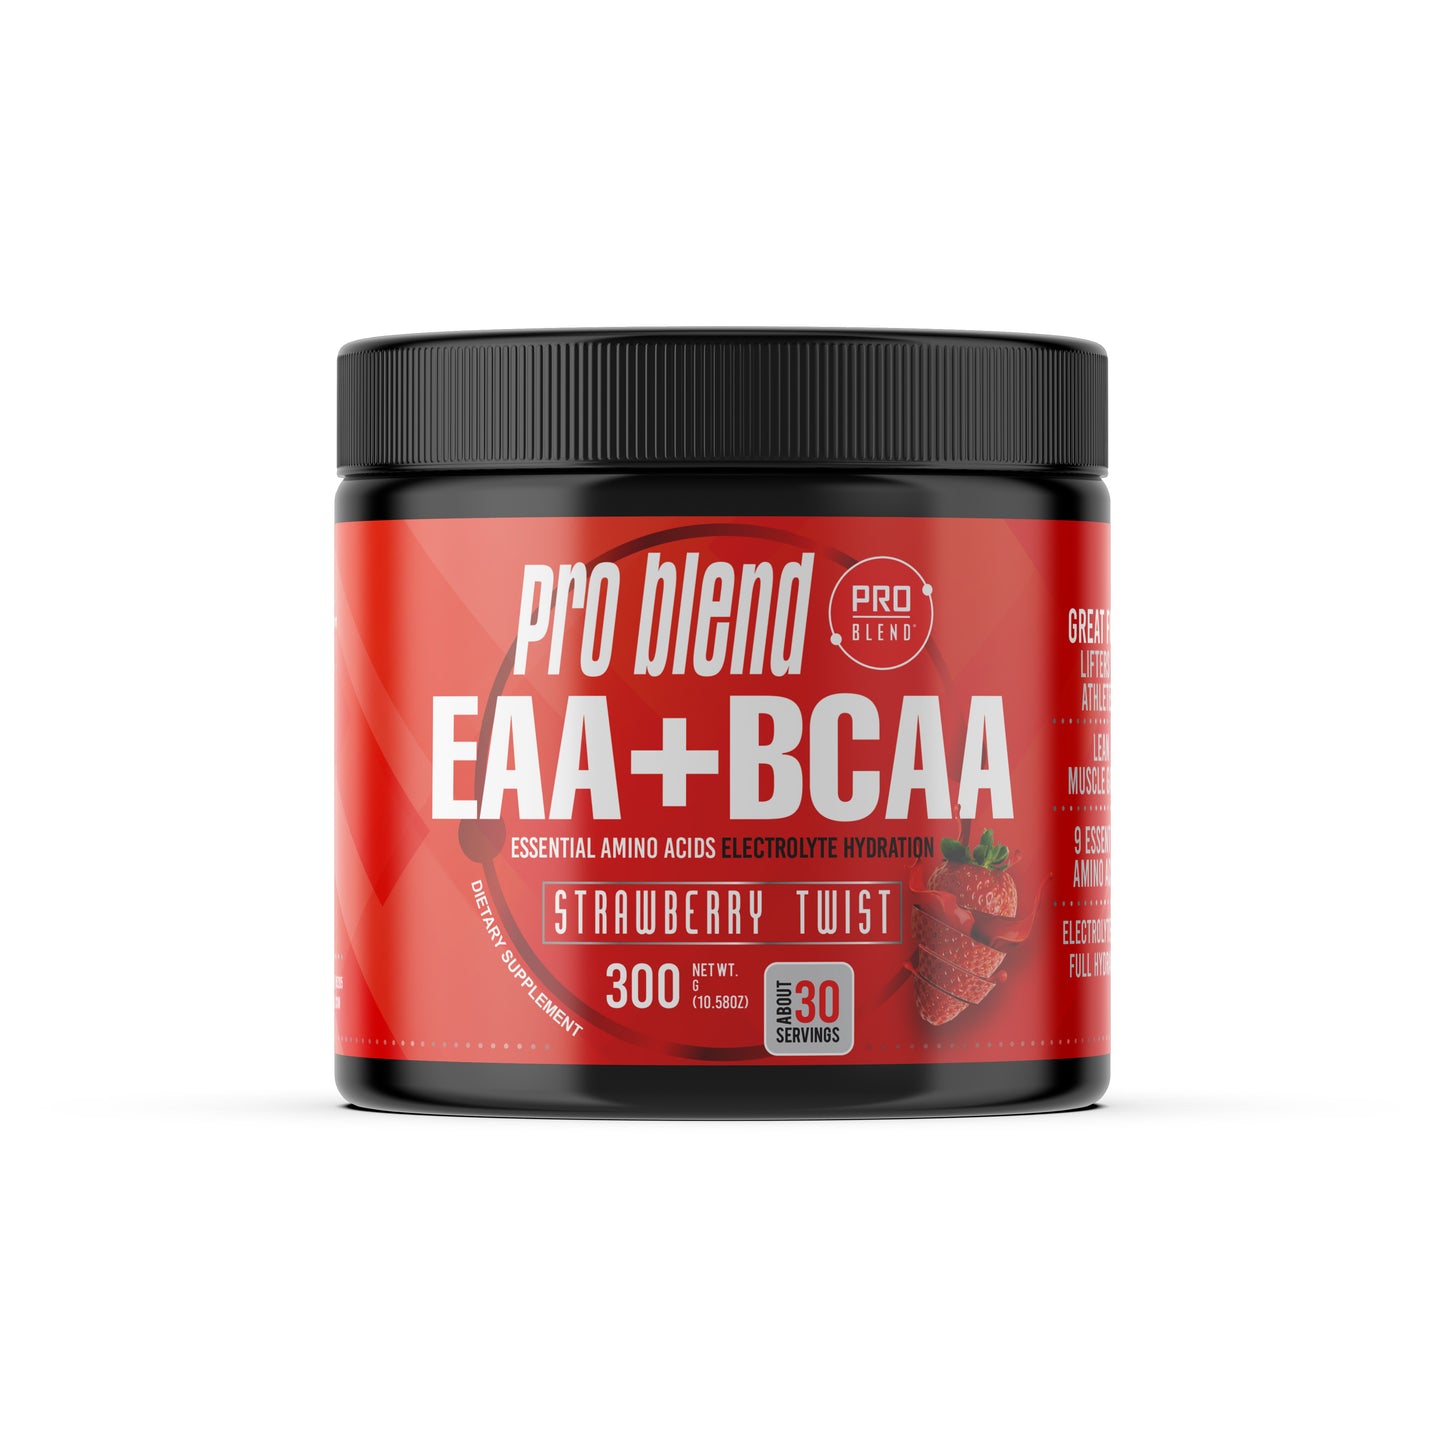 PRO BLEND BCAA + EAA Strawberry Twist. Essential Amino Acids Electrolyte Hydration. PRO BLEND